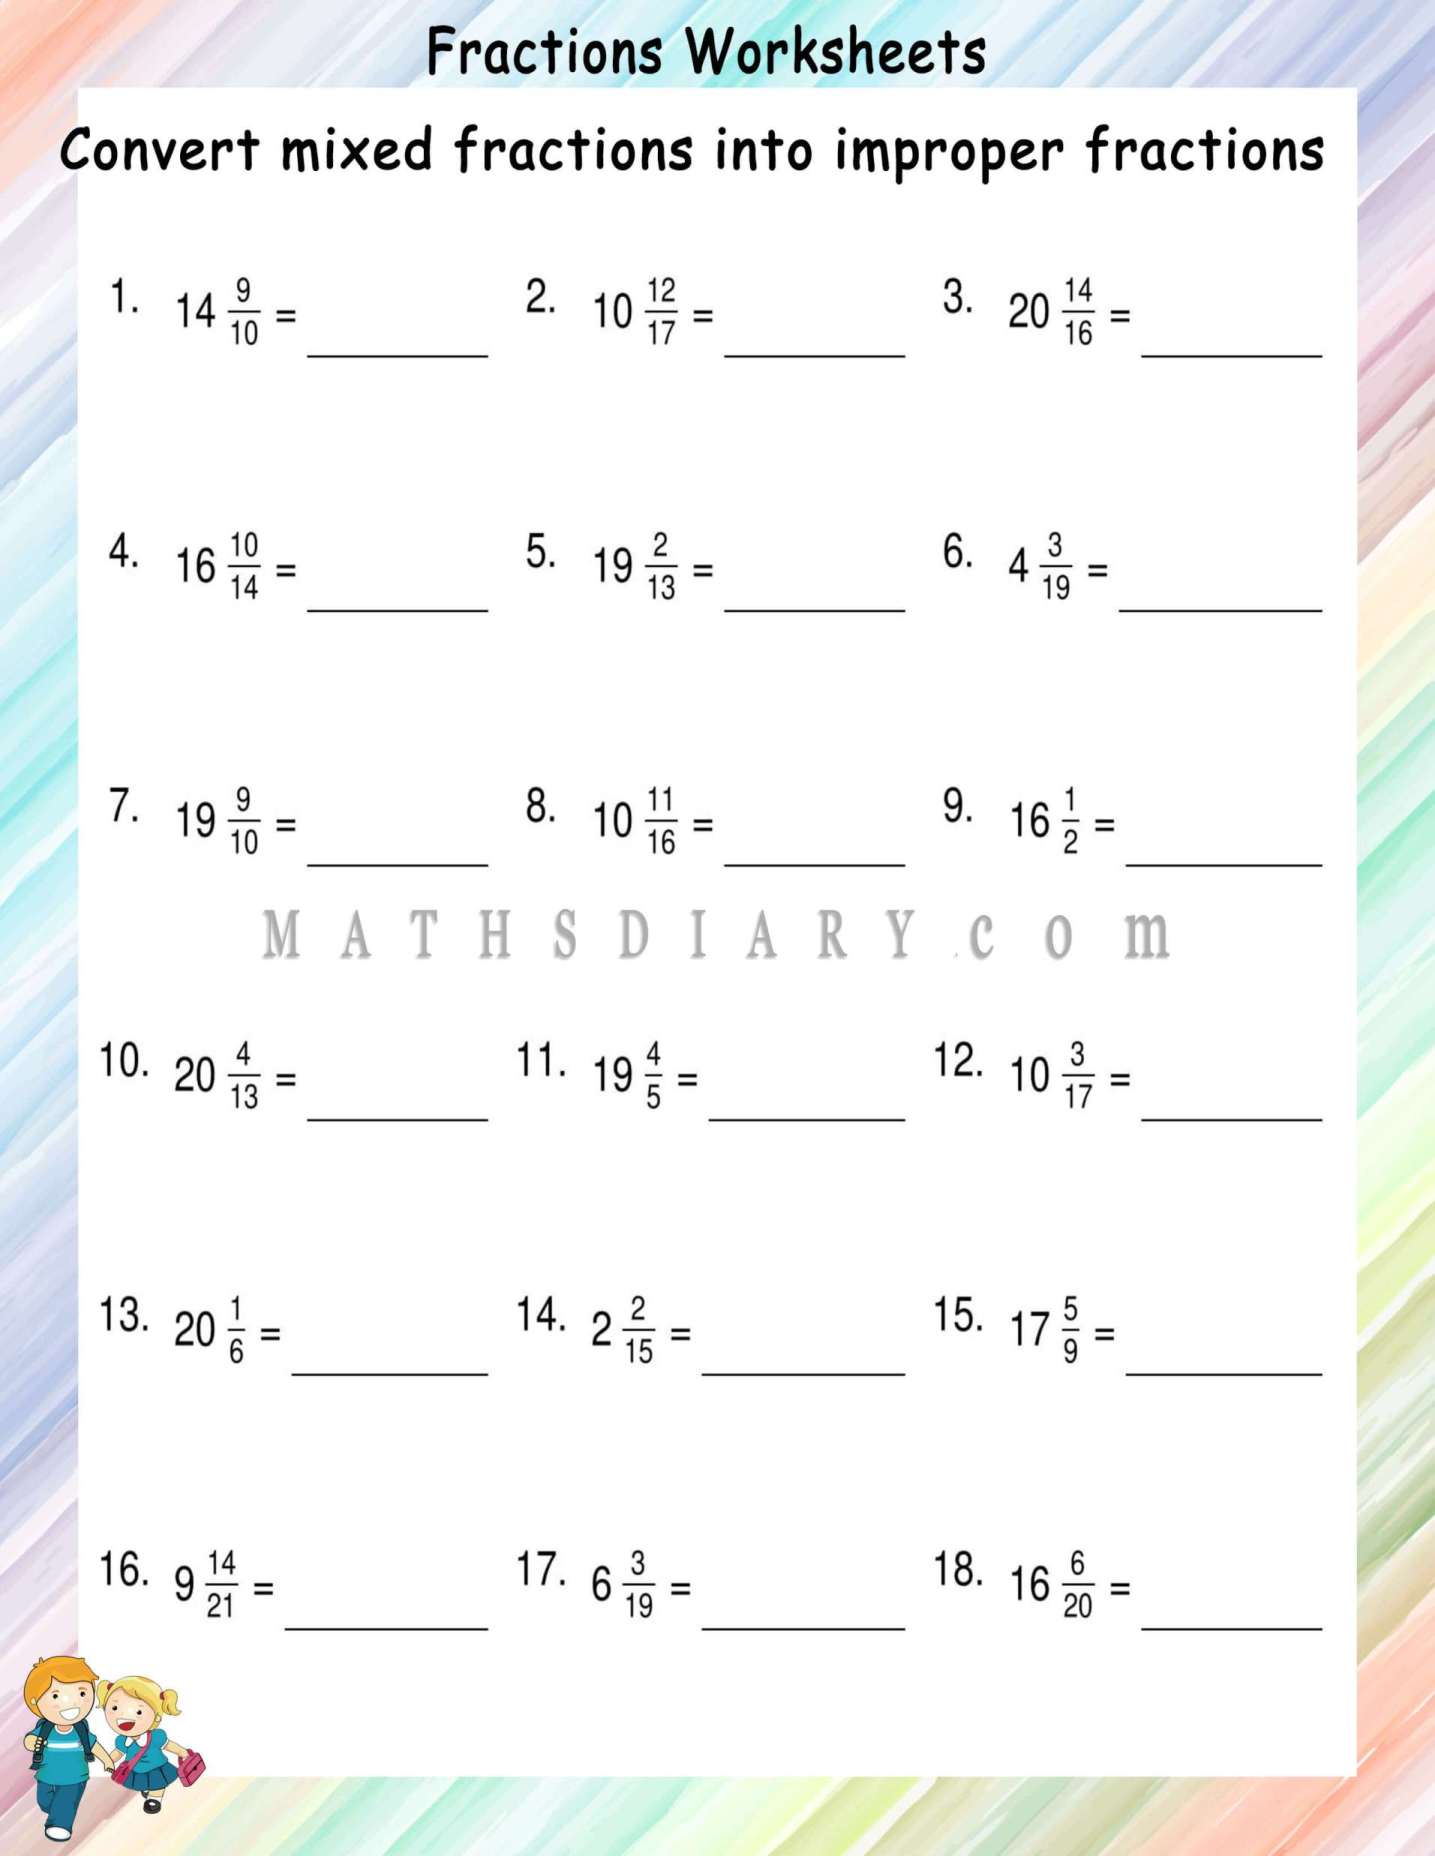 convert-mixed-fractions-to-improper-fractions-worksheets-math-worksheets-mathsdiary